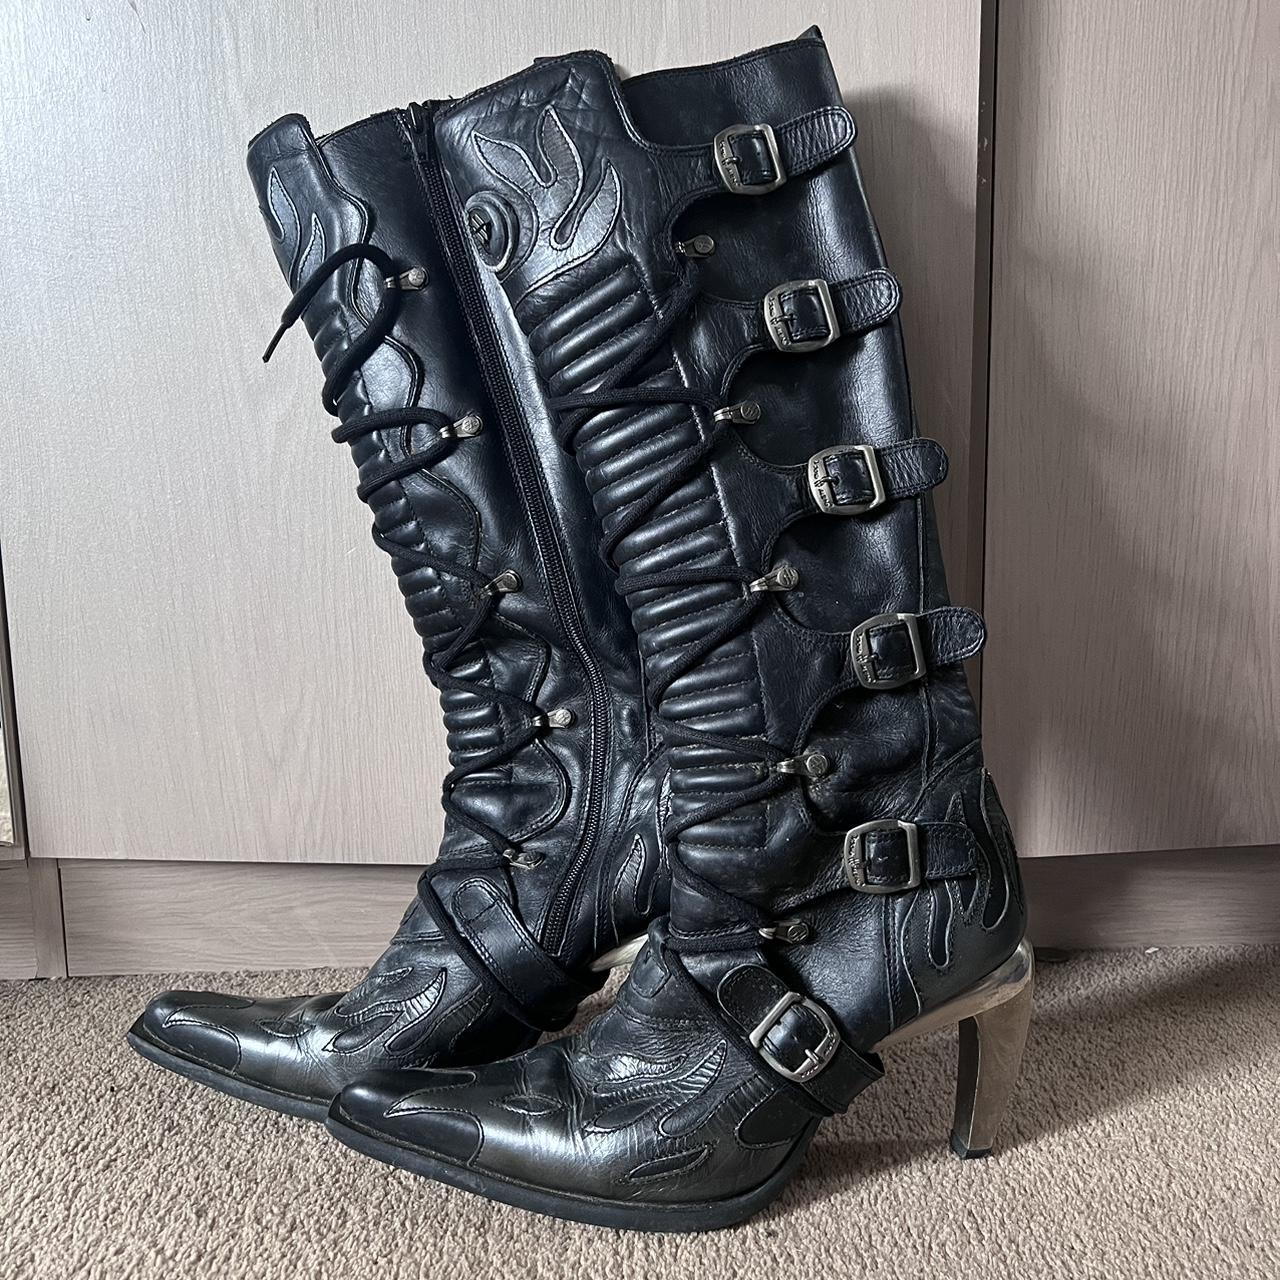 New Rock Women's Black and Silver Boots | Depop